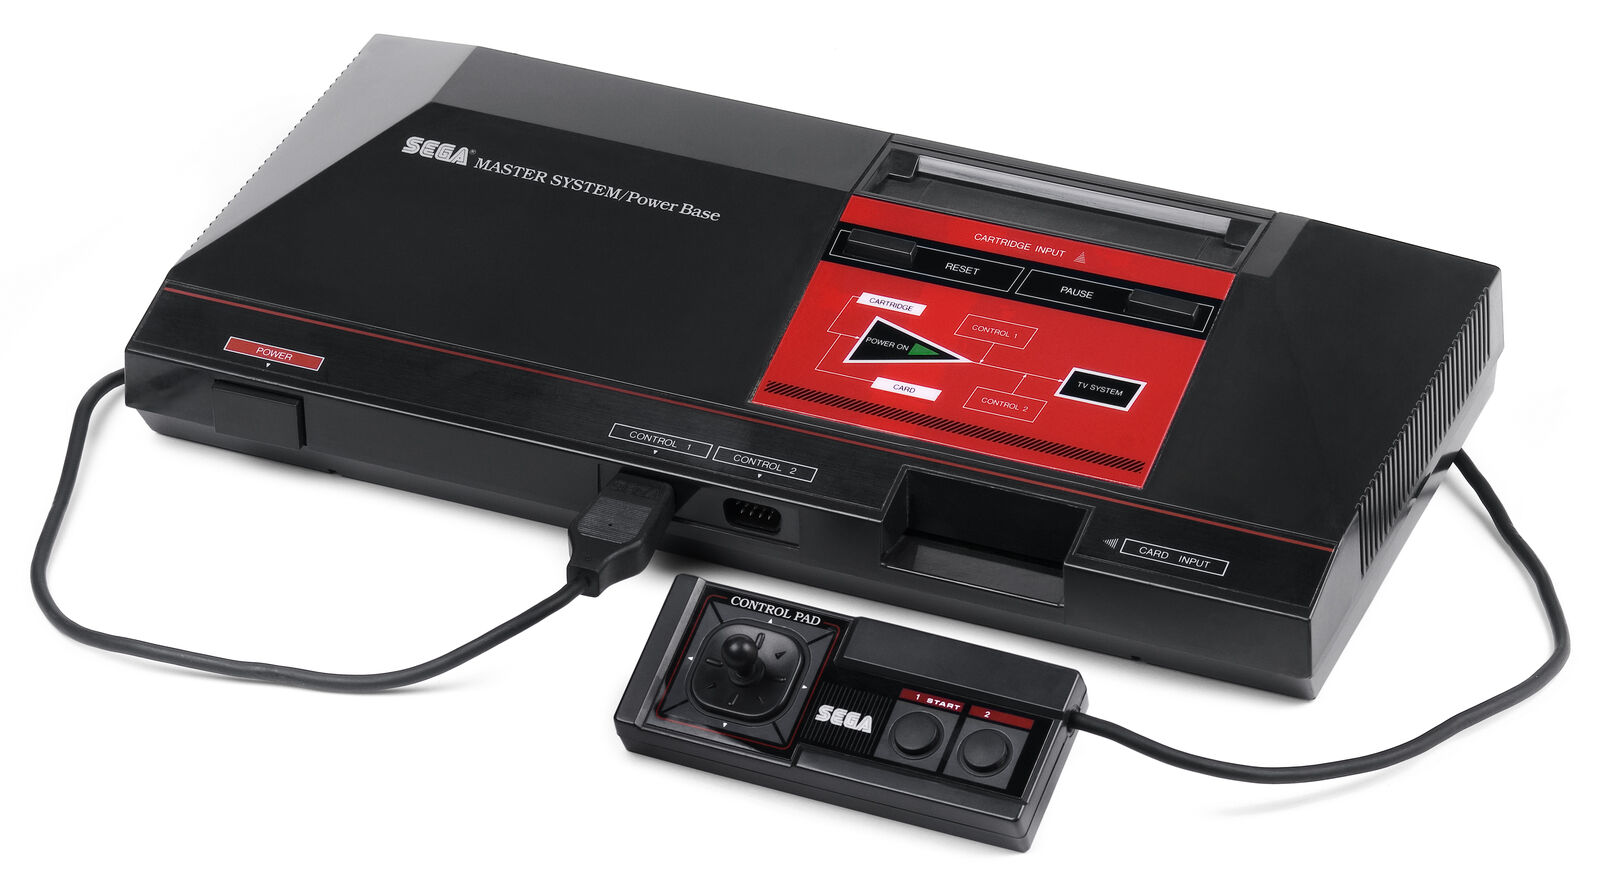 The Sega Master System home console and controller